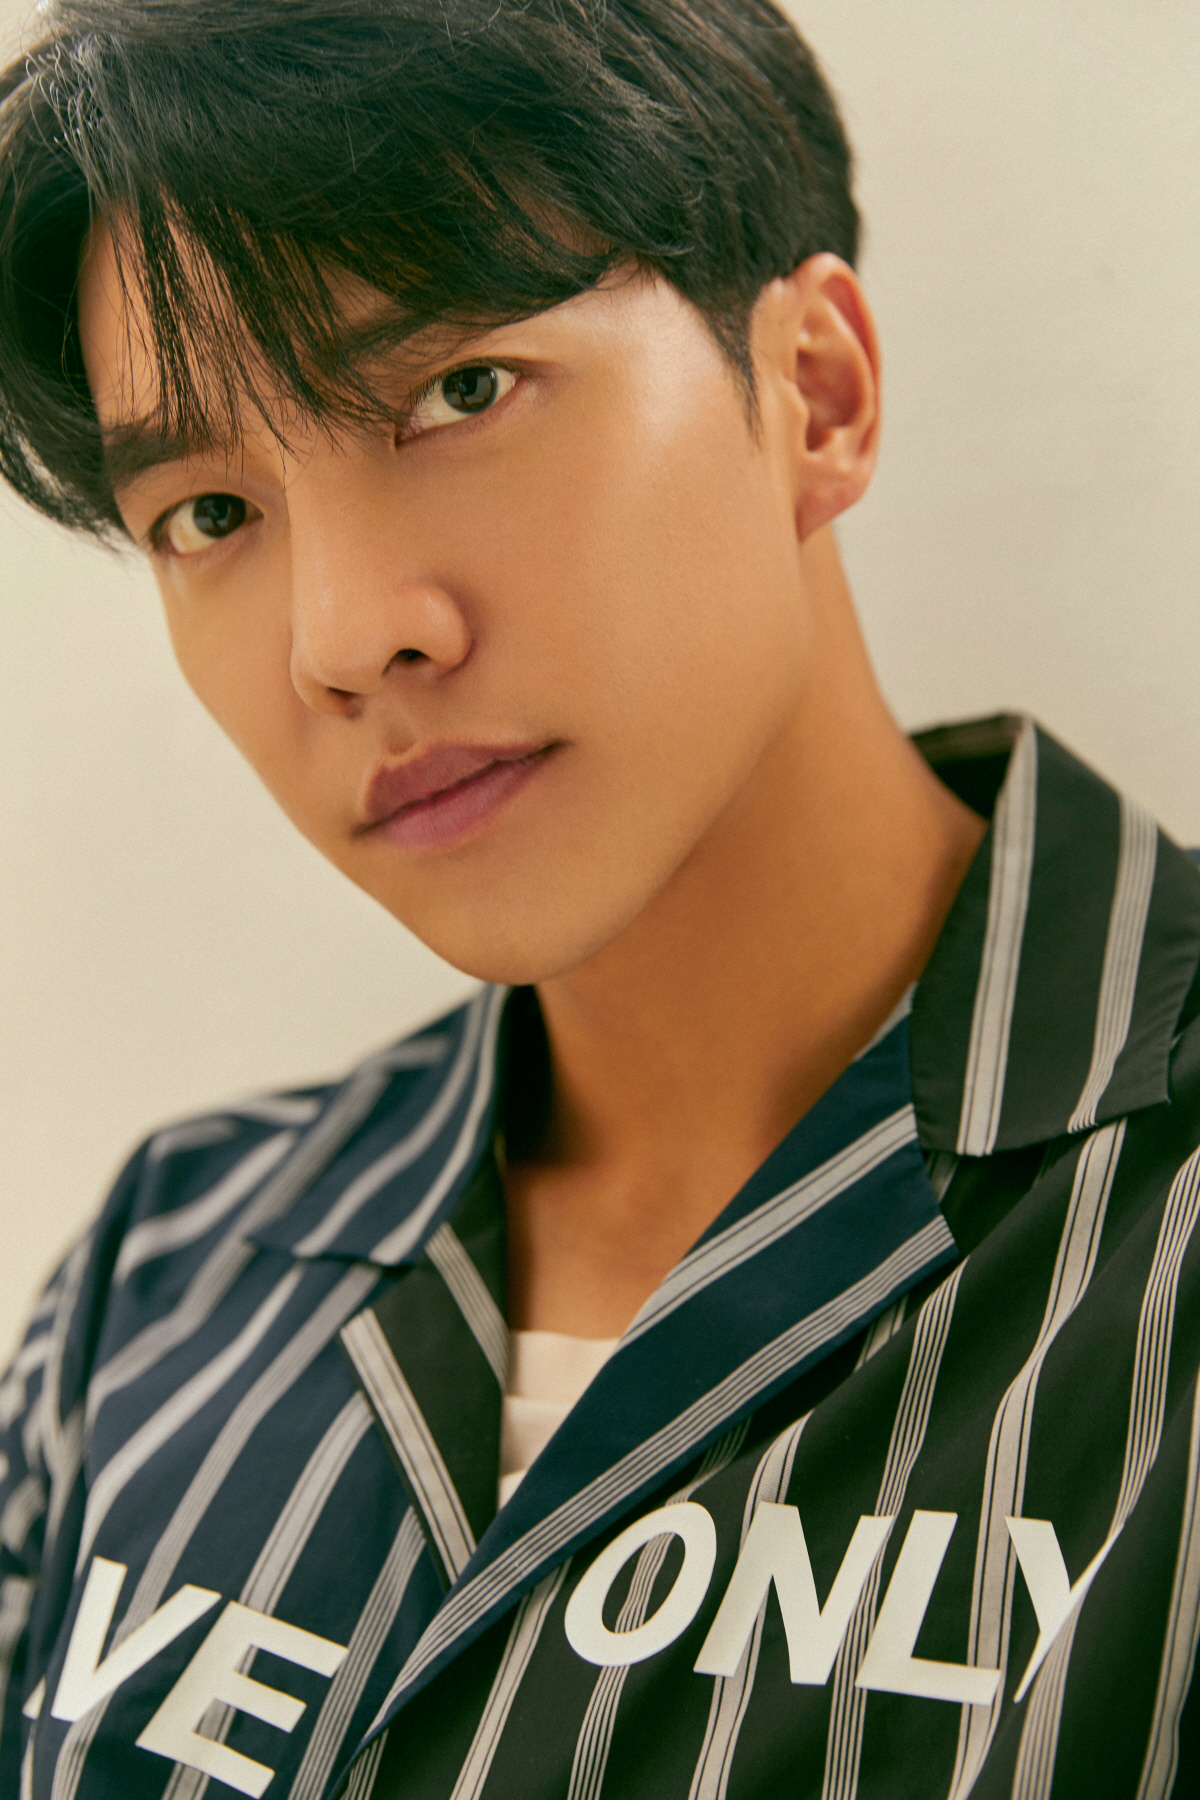 Singer and actor Lee Seung-gi, 34, showed his attitude as a professional entertainment worker in his 17th year of debut.Netflixs original entertainment program Twogether is an eye-cleaning healing travel variety in which two other stars from Lee Seung-gi, Ryu Ho and language are traveling around Asia this summer.Since it was released simultaneously around the world on March 26, it has become popular among top 10 contents in more than five countries, and the two people have become more and more aware of it.The concept of traveling and mission crossing was also evaluated as fresh.The two actors took the first steps of their trip in September 2019, in the holy land of the rising backpacking trip, in Yuyakarta, Indonesia, followed by a month-long tour of six cities of Asia, returning to Seoul via Angels Island Bali, Bangkok, Chiang Mai and Pokara and Kathmandu in Nepal.Twogether has differentiated the existing travel entertainment from two youth stars Lee Seung-gi and Ryu Ho, who have different nationality and culture.I also introduced the travel destination recommended by the two fans to the viewers and boasted that it was an entertainment that I had never seen before in that I performed a meaningful mission.Lee Seung-gi, who was born as a professional entertainer through many entertainments from KBS2 1 night and 2 days to SBS All The Butlers, was outstanding.Ryu Ho, a beginner of entertainment, added fun to entertainment Twogether with hero.Lee Seung-gi met with reporters online on the morning of the 3rd and conducted an interview.Twogether is showing its hot popularity, including its debut in top10 content in five countries at the same time as it was released; Lee Seung-gi said: Thank you and its an honor.We opened it in more than 190 countries through Netflix, and I am grateful for your rapid love of our content even though it is different from language and culture.I feel good because we have made it hard and made it hard, but it seems to have good results. In particular, through this entertainment program, I met with the star of the foreign star Ryu Ho. Lee Seung-gi said, It is also an honor to do it again with Ryu.I think it is my luck to meet the jewel of entertainment.Especially, he told me about the travel variety. In my case, it seems that the entertainment that uses the body outside and uses the body rather than the entertainment in the studio is well suited to me, and the body is always hard, but it seems to be happy to get the result after the hard work. Lee Seung-gi said, When I met Lee Ho through his work, I imagined a romantic man and Feelings of Sweet Guy.In fact, Lee Ho had both things, and there were many parts with the same sense of energy and the opening, so during the filming, he was able to shoot comfortably without Feelings uncomfortable even though the language and culture were different. He enjoyed growing up through him.I told him that I was the master of entertainment, and Lee said, I left a strong aspiration that I would not be like this next time I go.Twogether was close to Top Model for Lee Seung-gi in that he had to go through interviews with other stars who did not speak.Lee Seung-gi said, At first, I had to eat, awkward, and broadcast, but I did not know how to approach it because I did not speak language. I traveled, slept, ate rice, missioned Twogether and met fans.I want to meet again someday when I break up at the airport, but I hug such a heart.And the last mission was in Korea, but I introduced Koreas good places and food, and I was sad when I said that I wanted to travel to Korea.I feel sorry and strong that I can not easily meet because the country is different. Lee Seung-gi also said that Ryus Sunggi and Kang Ho-dongs Sunggi sound like the same Feelings. I do not know why they are so anxious about me.Hodong Lees brother s Sunggiya and Lee Ho s Sunggi seem to be similar. Lee Seung-gi is already the second Top Model in the Netflix entertainment program to Twogether following Youre the perpetrator.Netflix entertainment is different from the environment in which various details must continue to be broadcast on regulars because everything else is released after all the recordings are completed.It is Feelings that the base point and target are different because it is not a platform that broadcasts only in Korea but a platform for the whole world.It was Feelings, which is aimed at the content that everyone sees, he said. I do not know why you prefer me on Netflix, but I am grateful.I think the belief that I will survive even if I throw it in a barren environment is the reason I find myself. Lee Seung-gi said, It is 17 years old, and I always want to do a lot of greetings through movies and dramas while working on a platform called Netflix.Then, I wonder if there are things that I wanted to do, and that can go beyond the way I have been.I think it would be good as an actor if I could continue to work. Lee Seung-gis strengths were strong physical strength, survival that goes through the harsh environment, and The Electric Affinities.This was also the reason Lee Seung-gi could do long run: Lee Seung-gi is also recognized as an actor, singer, and entertainer.Once I have been awarded such a prize and acknowledged my value, it is a challenge to continue without losing the beginning of the future.Dream is my dream that I am working hard as long as I can do it as an active duty. Lee Seung-gi also confessed his 17-year-old entertainers troubles, saying, I am afraid that this is so familiar that I will flow to my usual routine.As the year builds up, there are many things that I know more and more successes, and I am more confident. I always want to do Top Model in a new environment.The big worry of a long-time person is familiarity. There are worries that he will fall into manners. Lee Seung-gi will show off a new entertainment program after Twogether.From 12th, TVN will meet viewers with Seoul Village, a new entertainment.